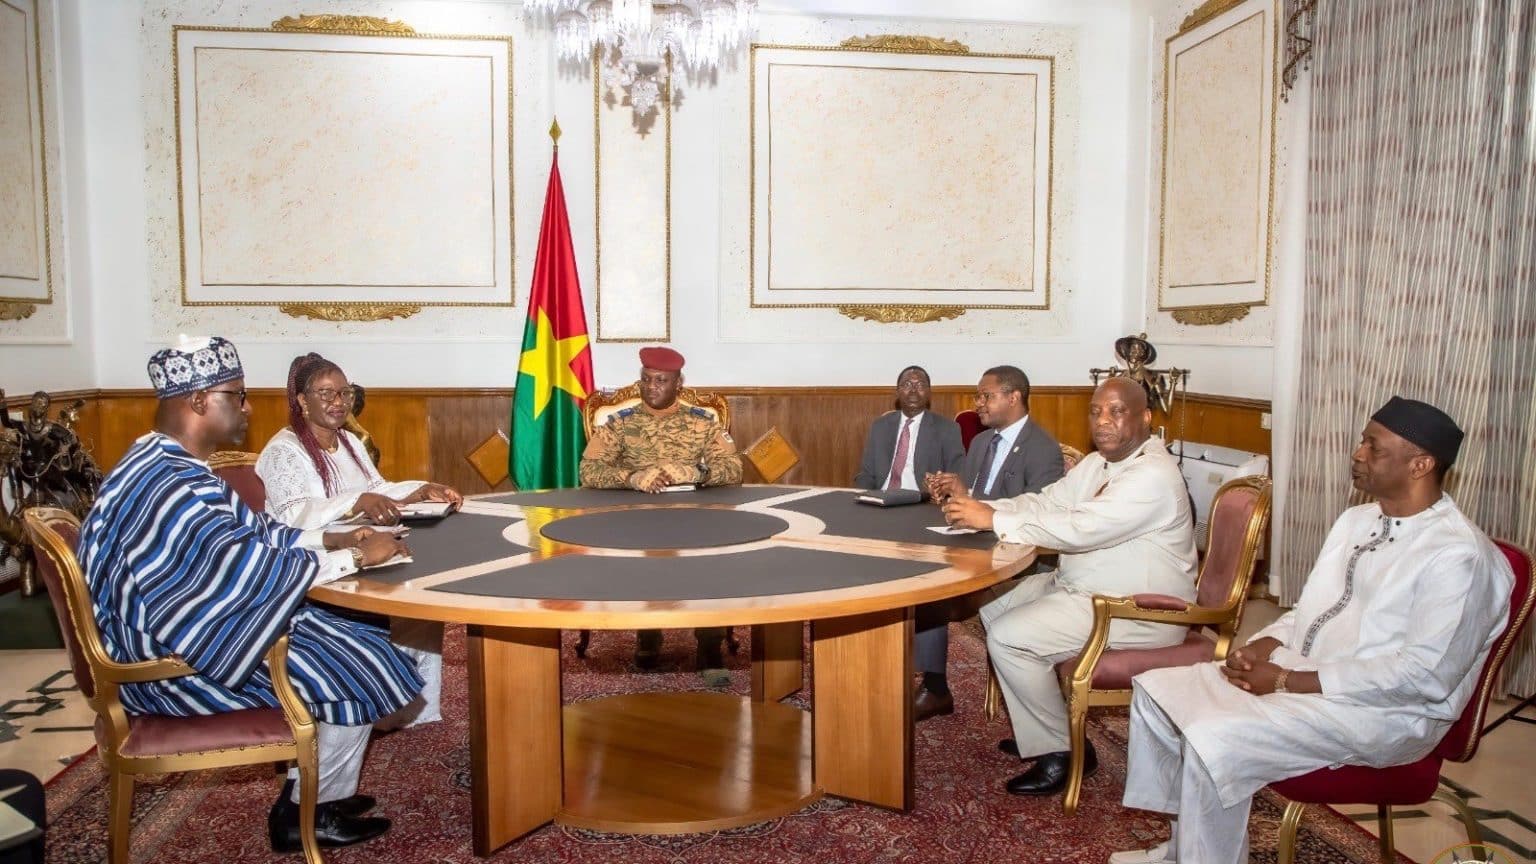 Foreign Ministers of Burkina Faso, Mali, and Guinea hold a tripartite meeting in Ouagadougou. Photo: Ministry of Foreign Affairs and International Cooperation of Mali.